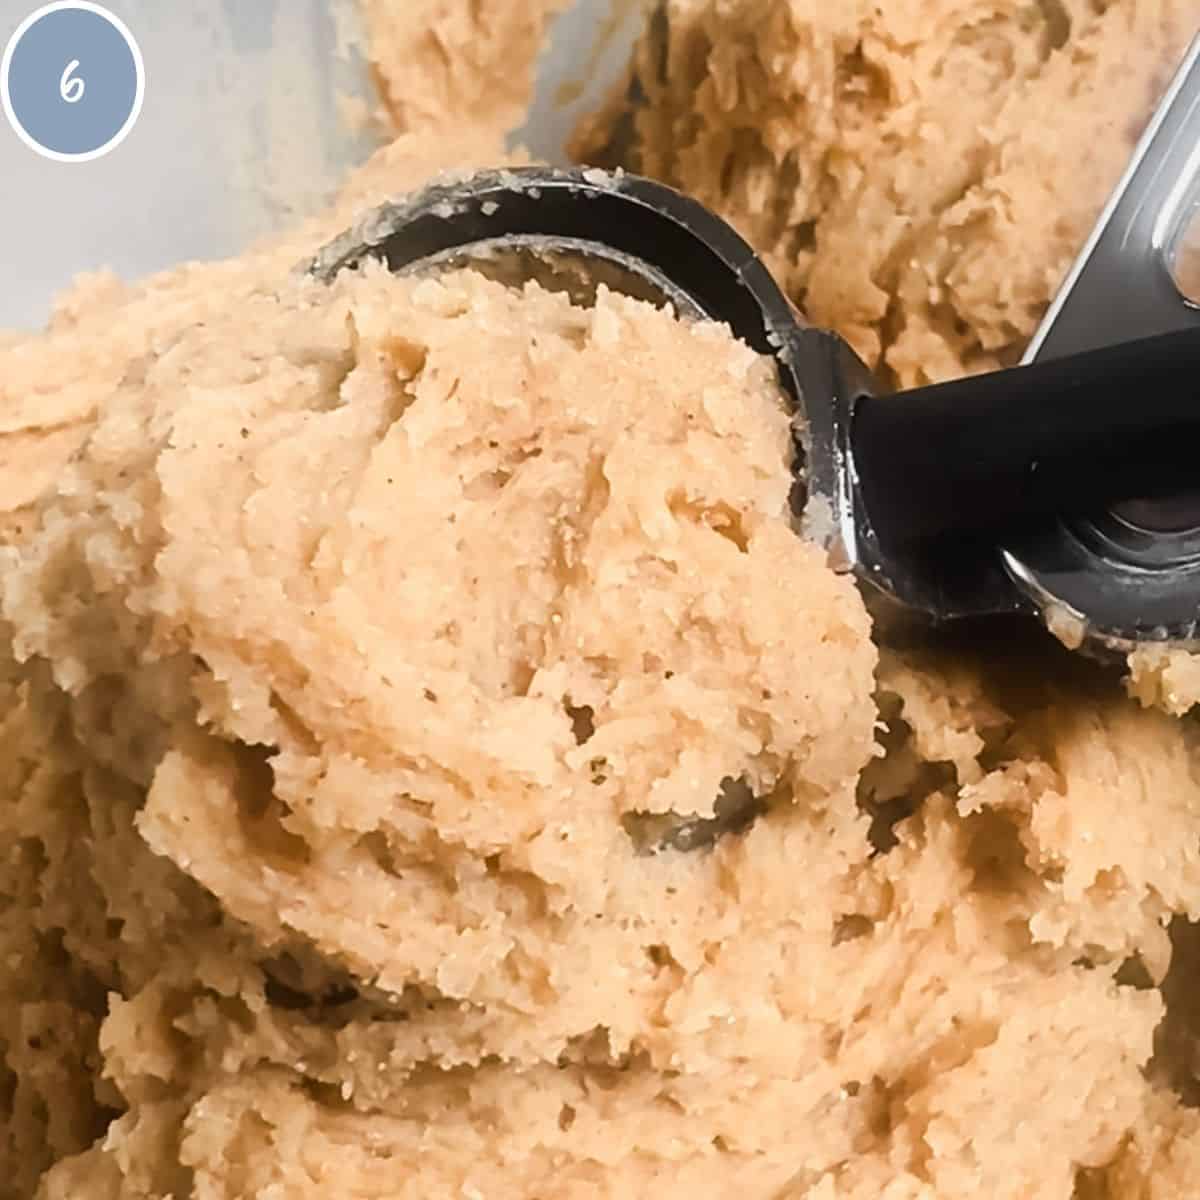 Scooping cookie dough out of bowl to roll it and place it on cookie sheet.